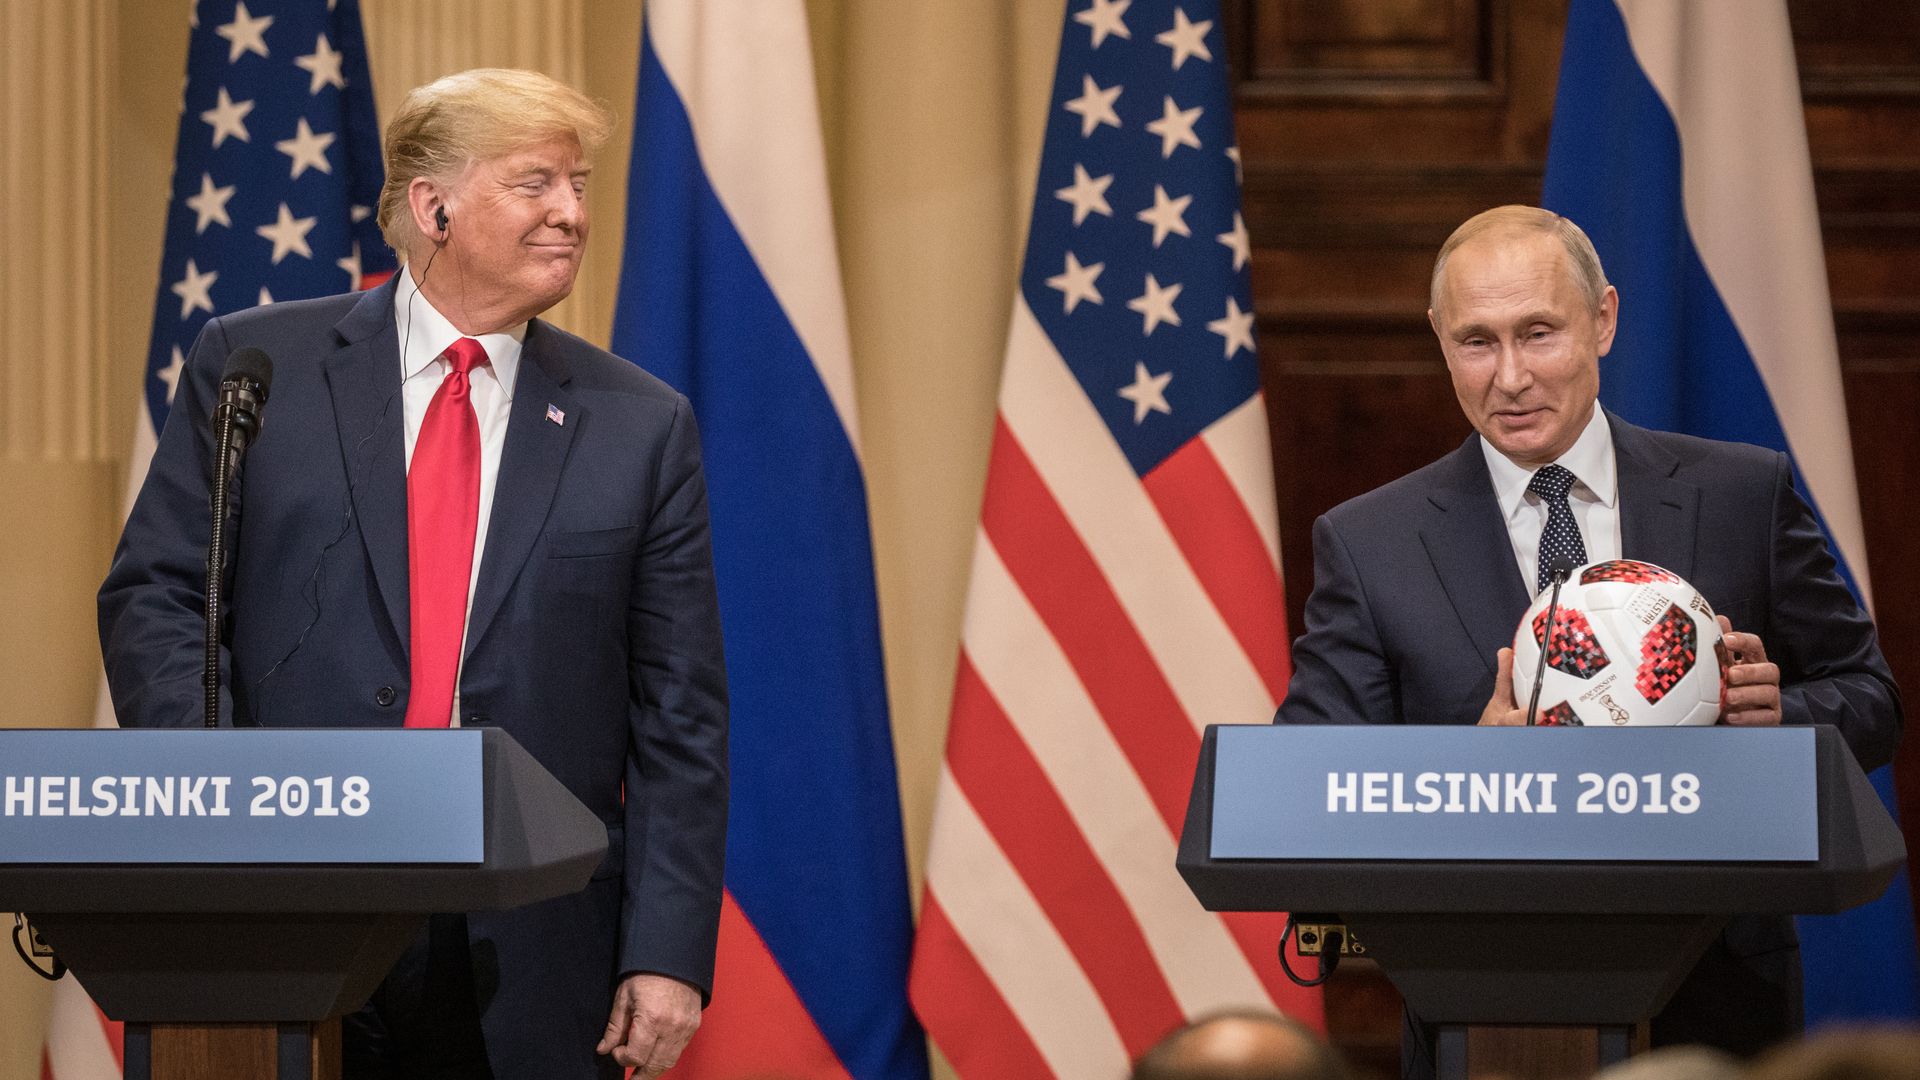 Russian President Vladimir Putin hands U.S. President Donald Trump a World Cup football during a joint press conference after their summit on July 16, 2018, in Helsinki.